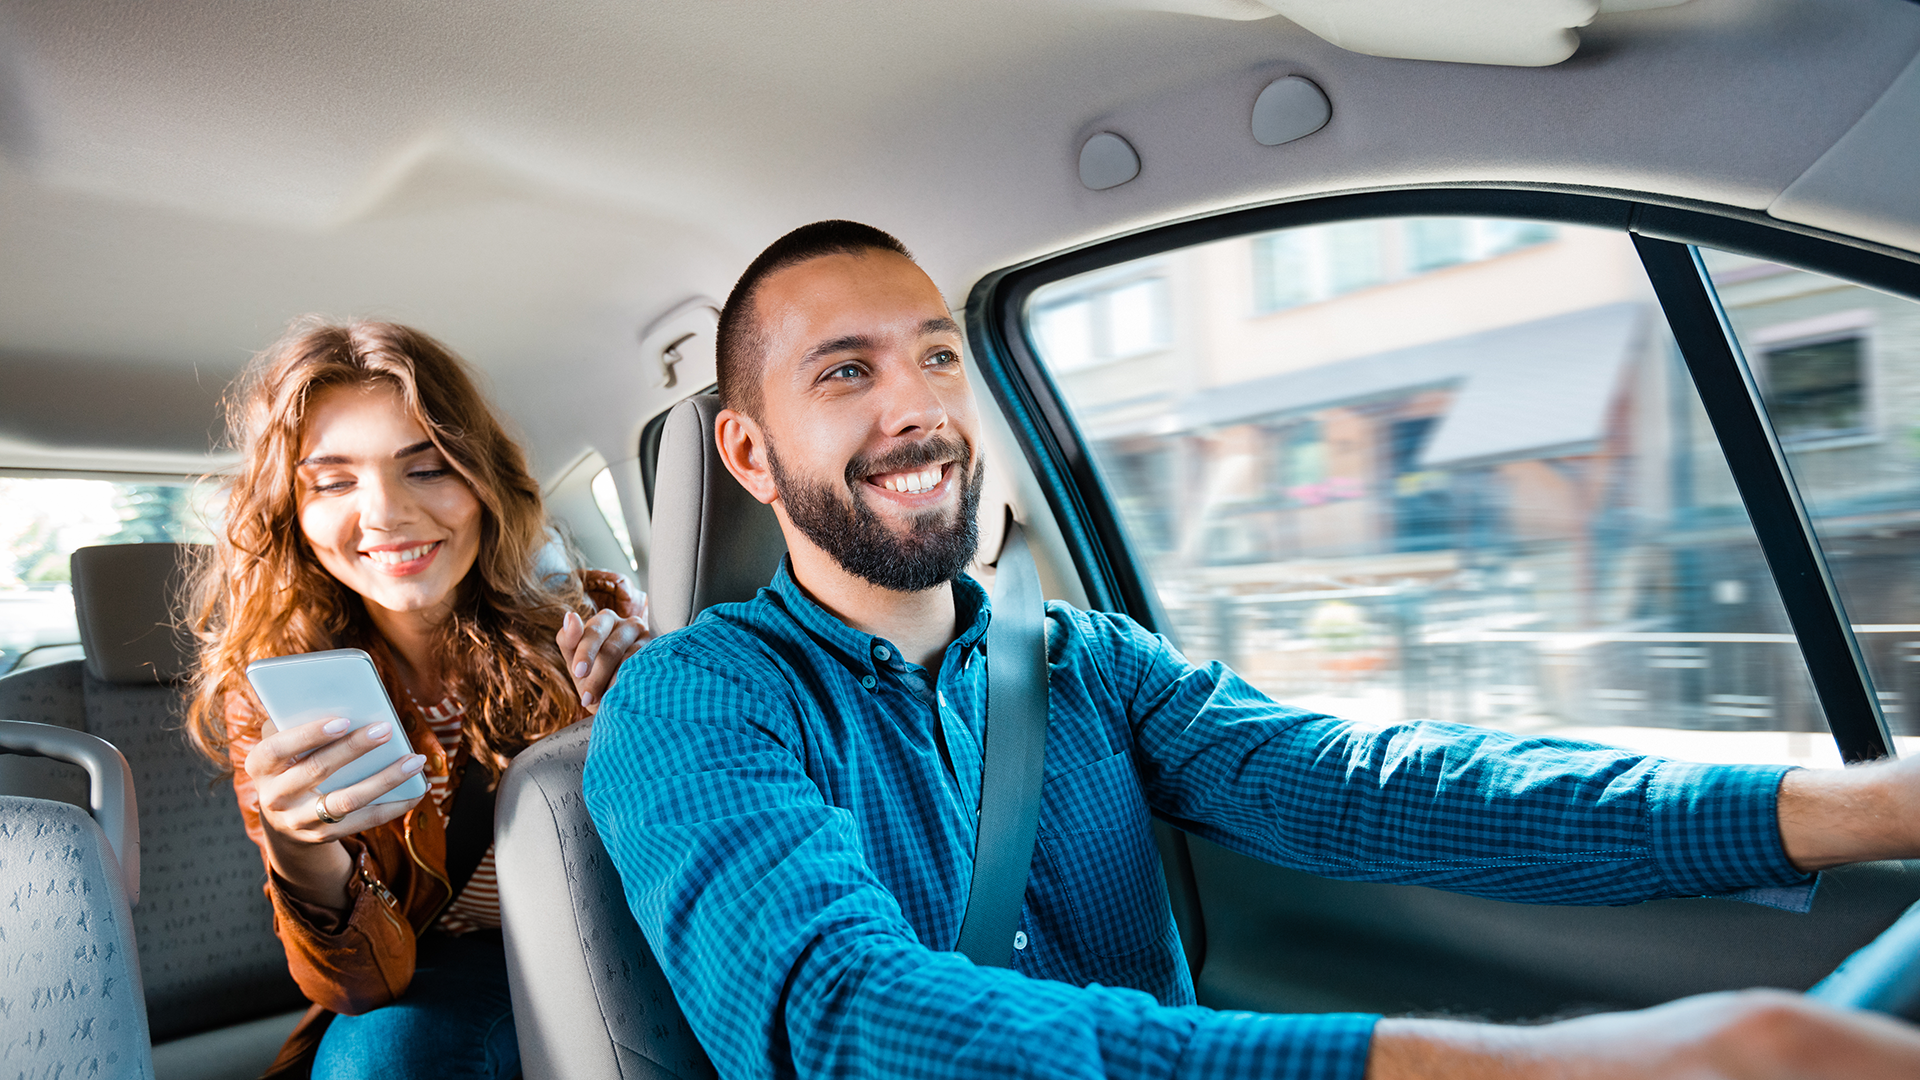 A man is smiling while driving a car. A female passenger is in the backseat smiling and looking at her phone.